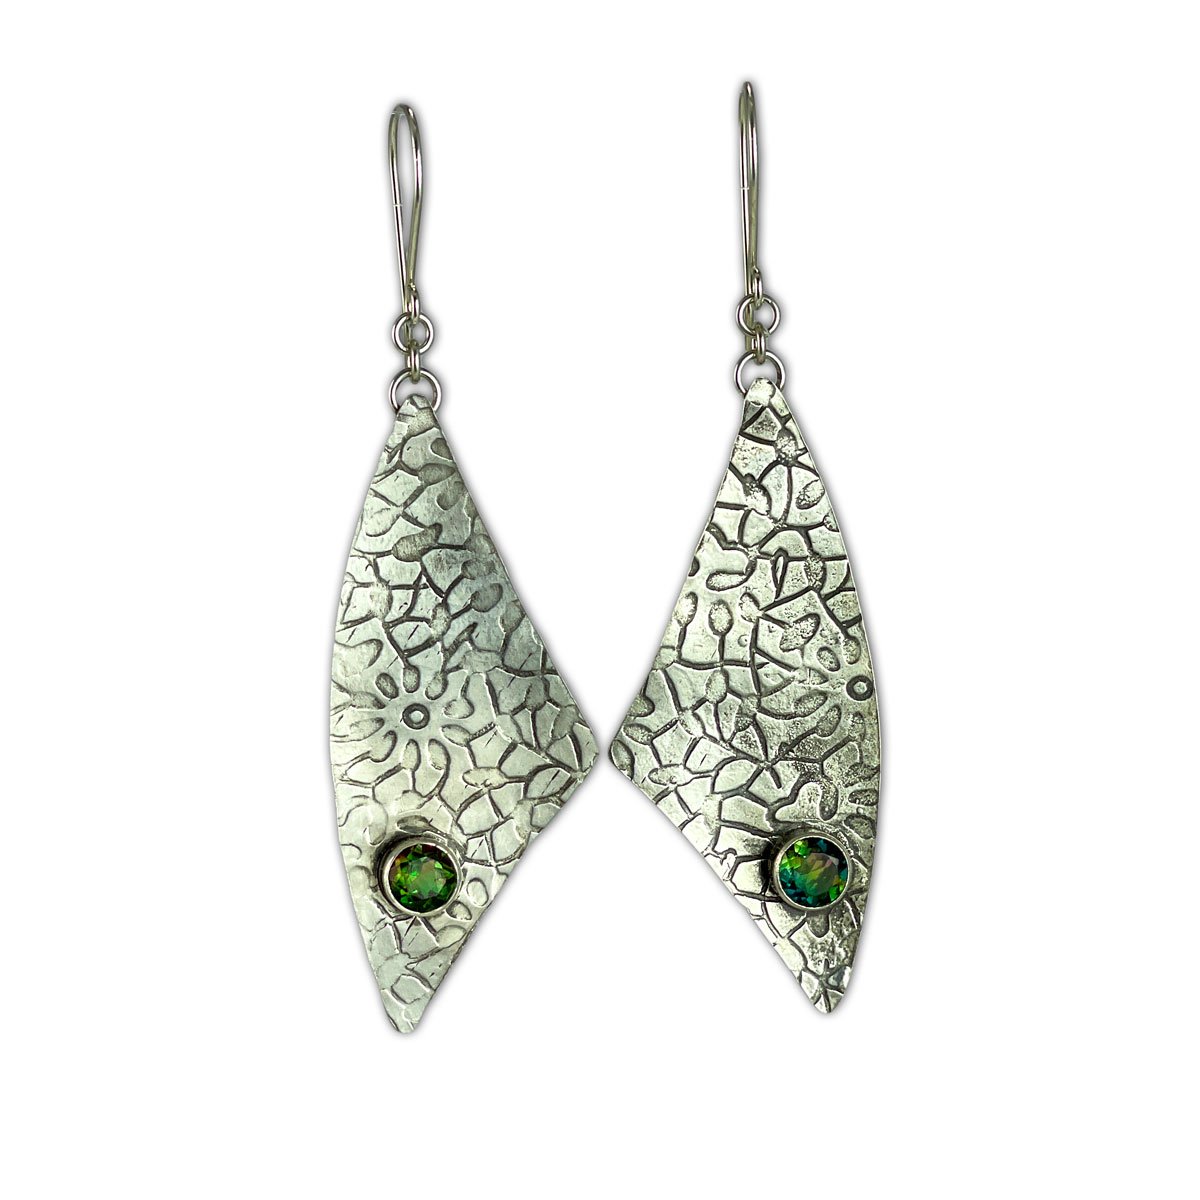 Textured Sterling Silver Large Sail Earrings with Faceted Tourmaline accent